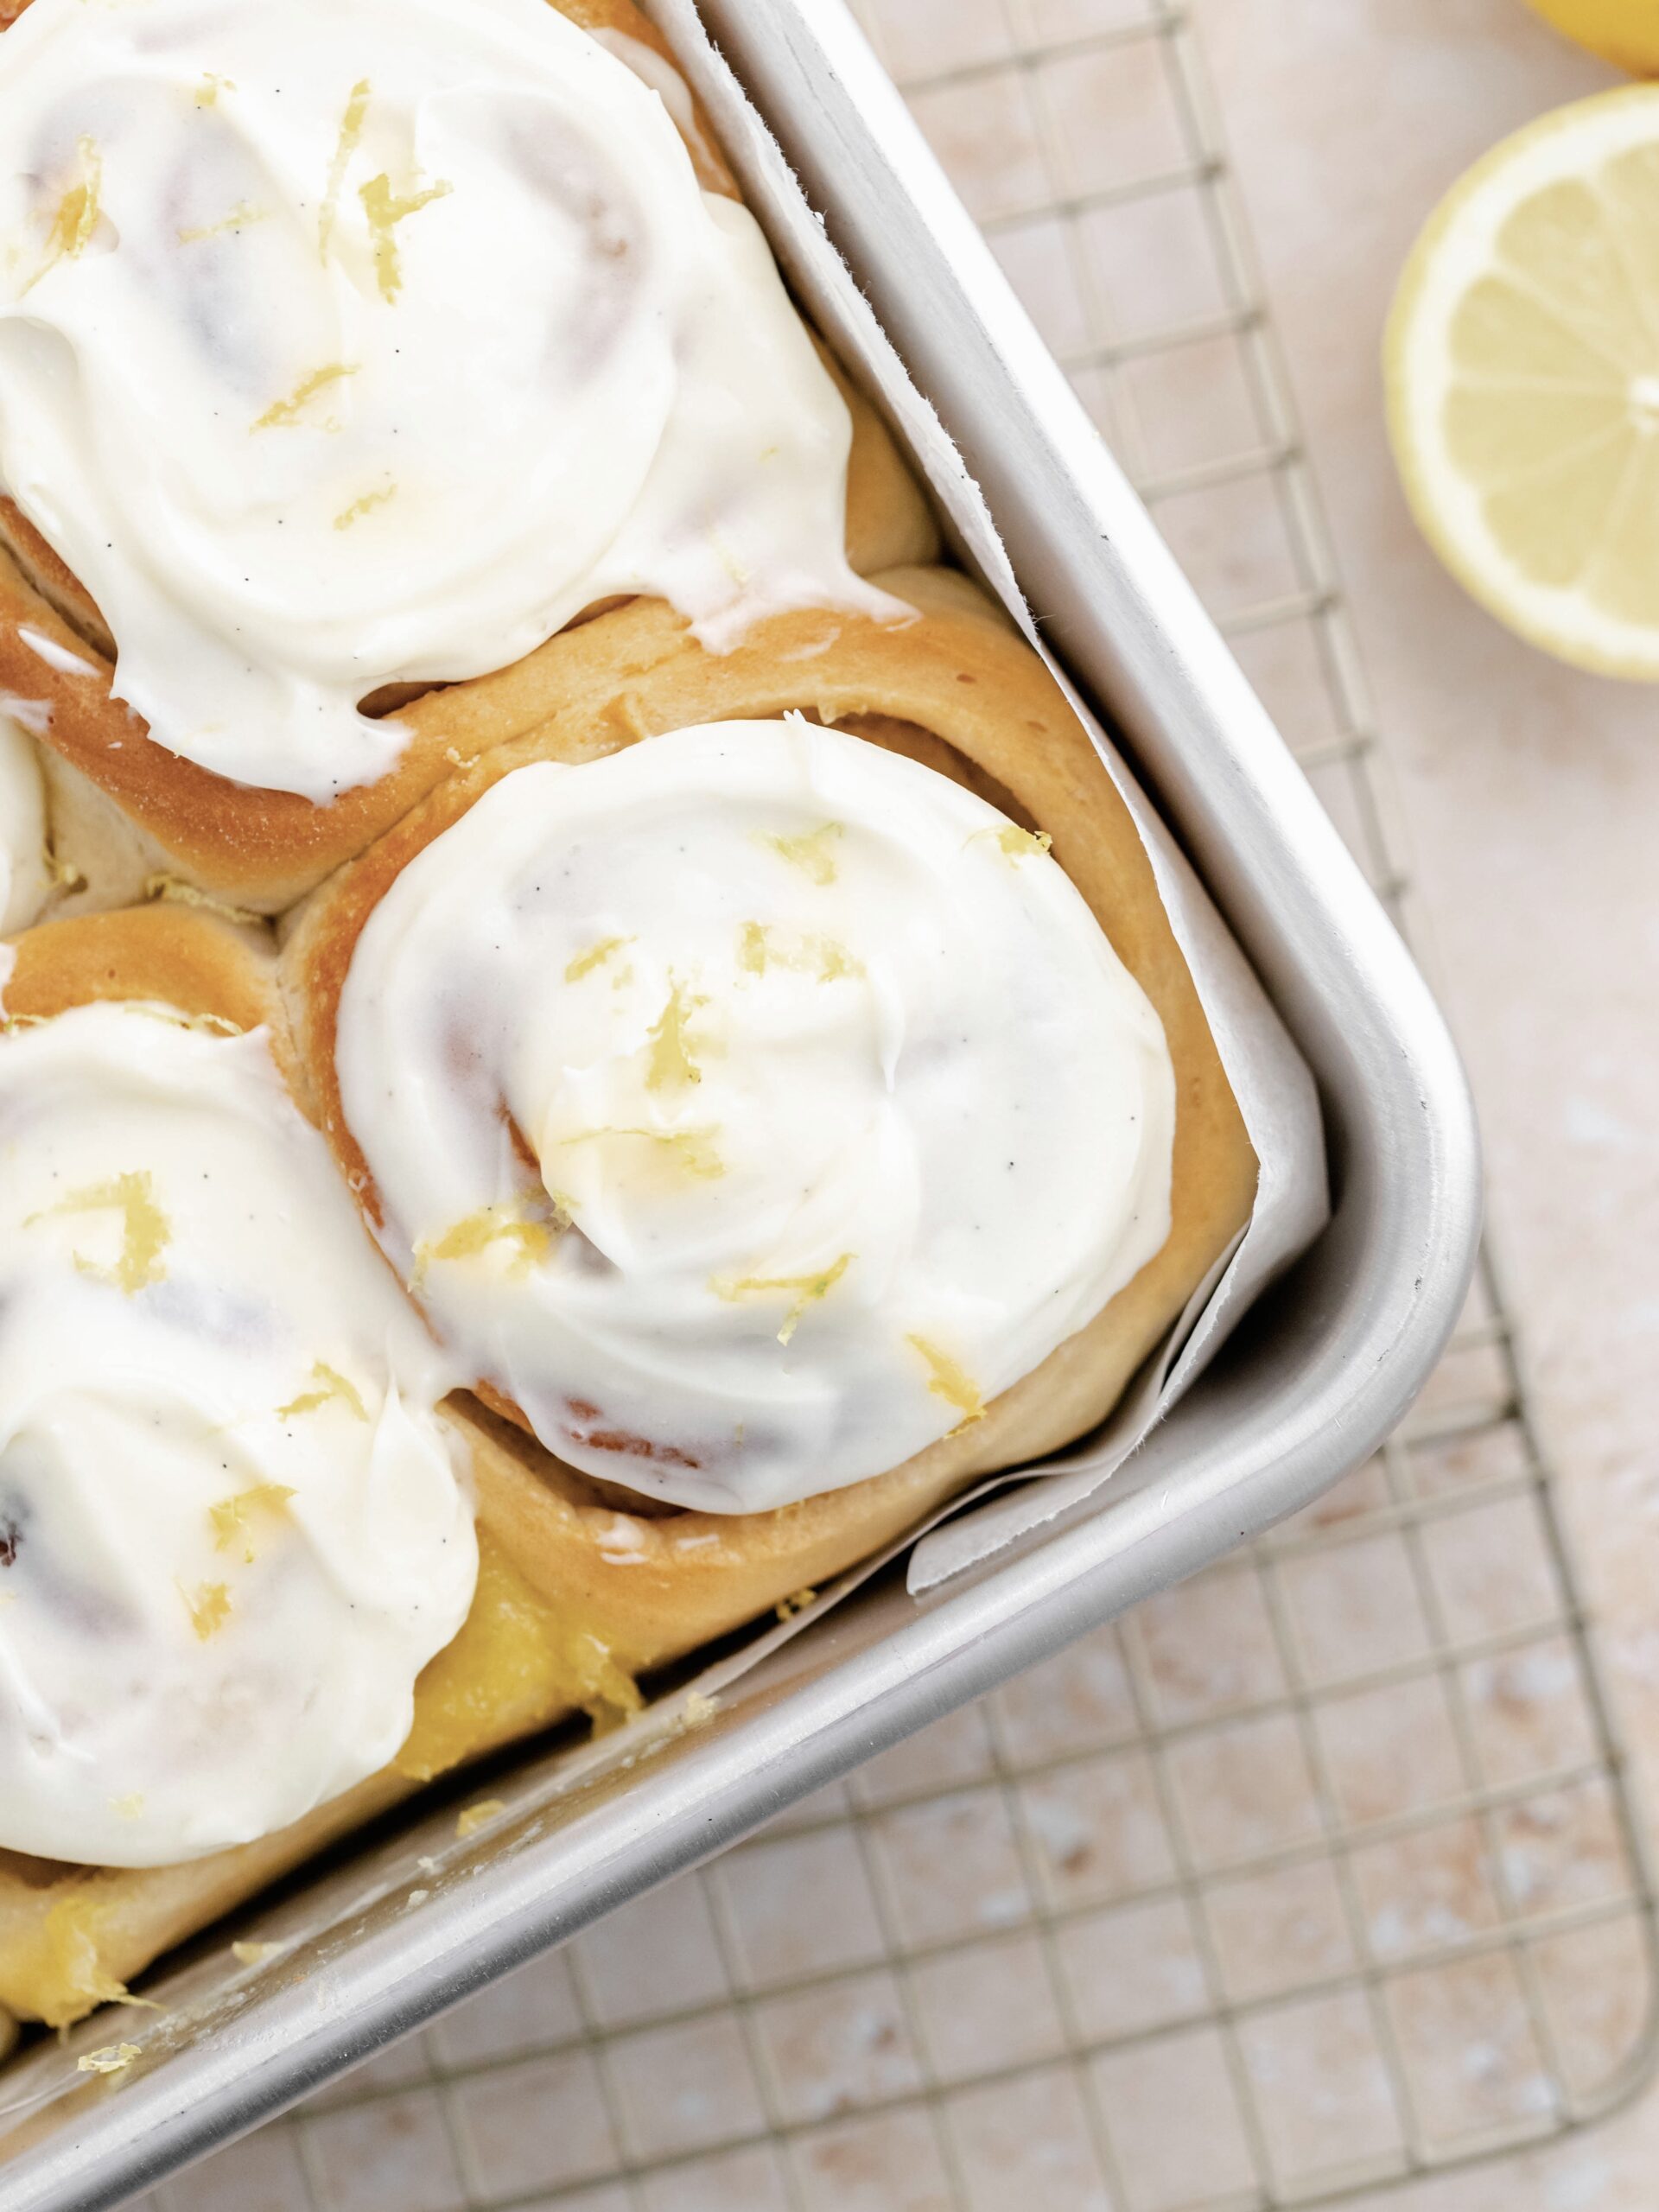 Baked lemon rolls with cream cheese frosting.